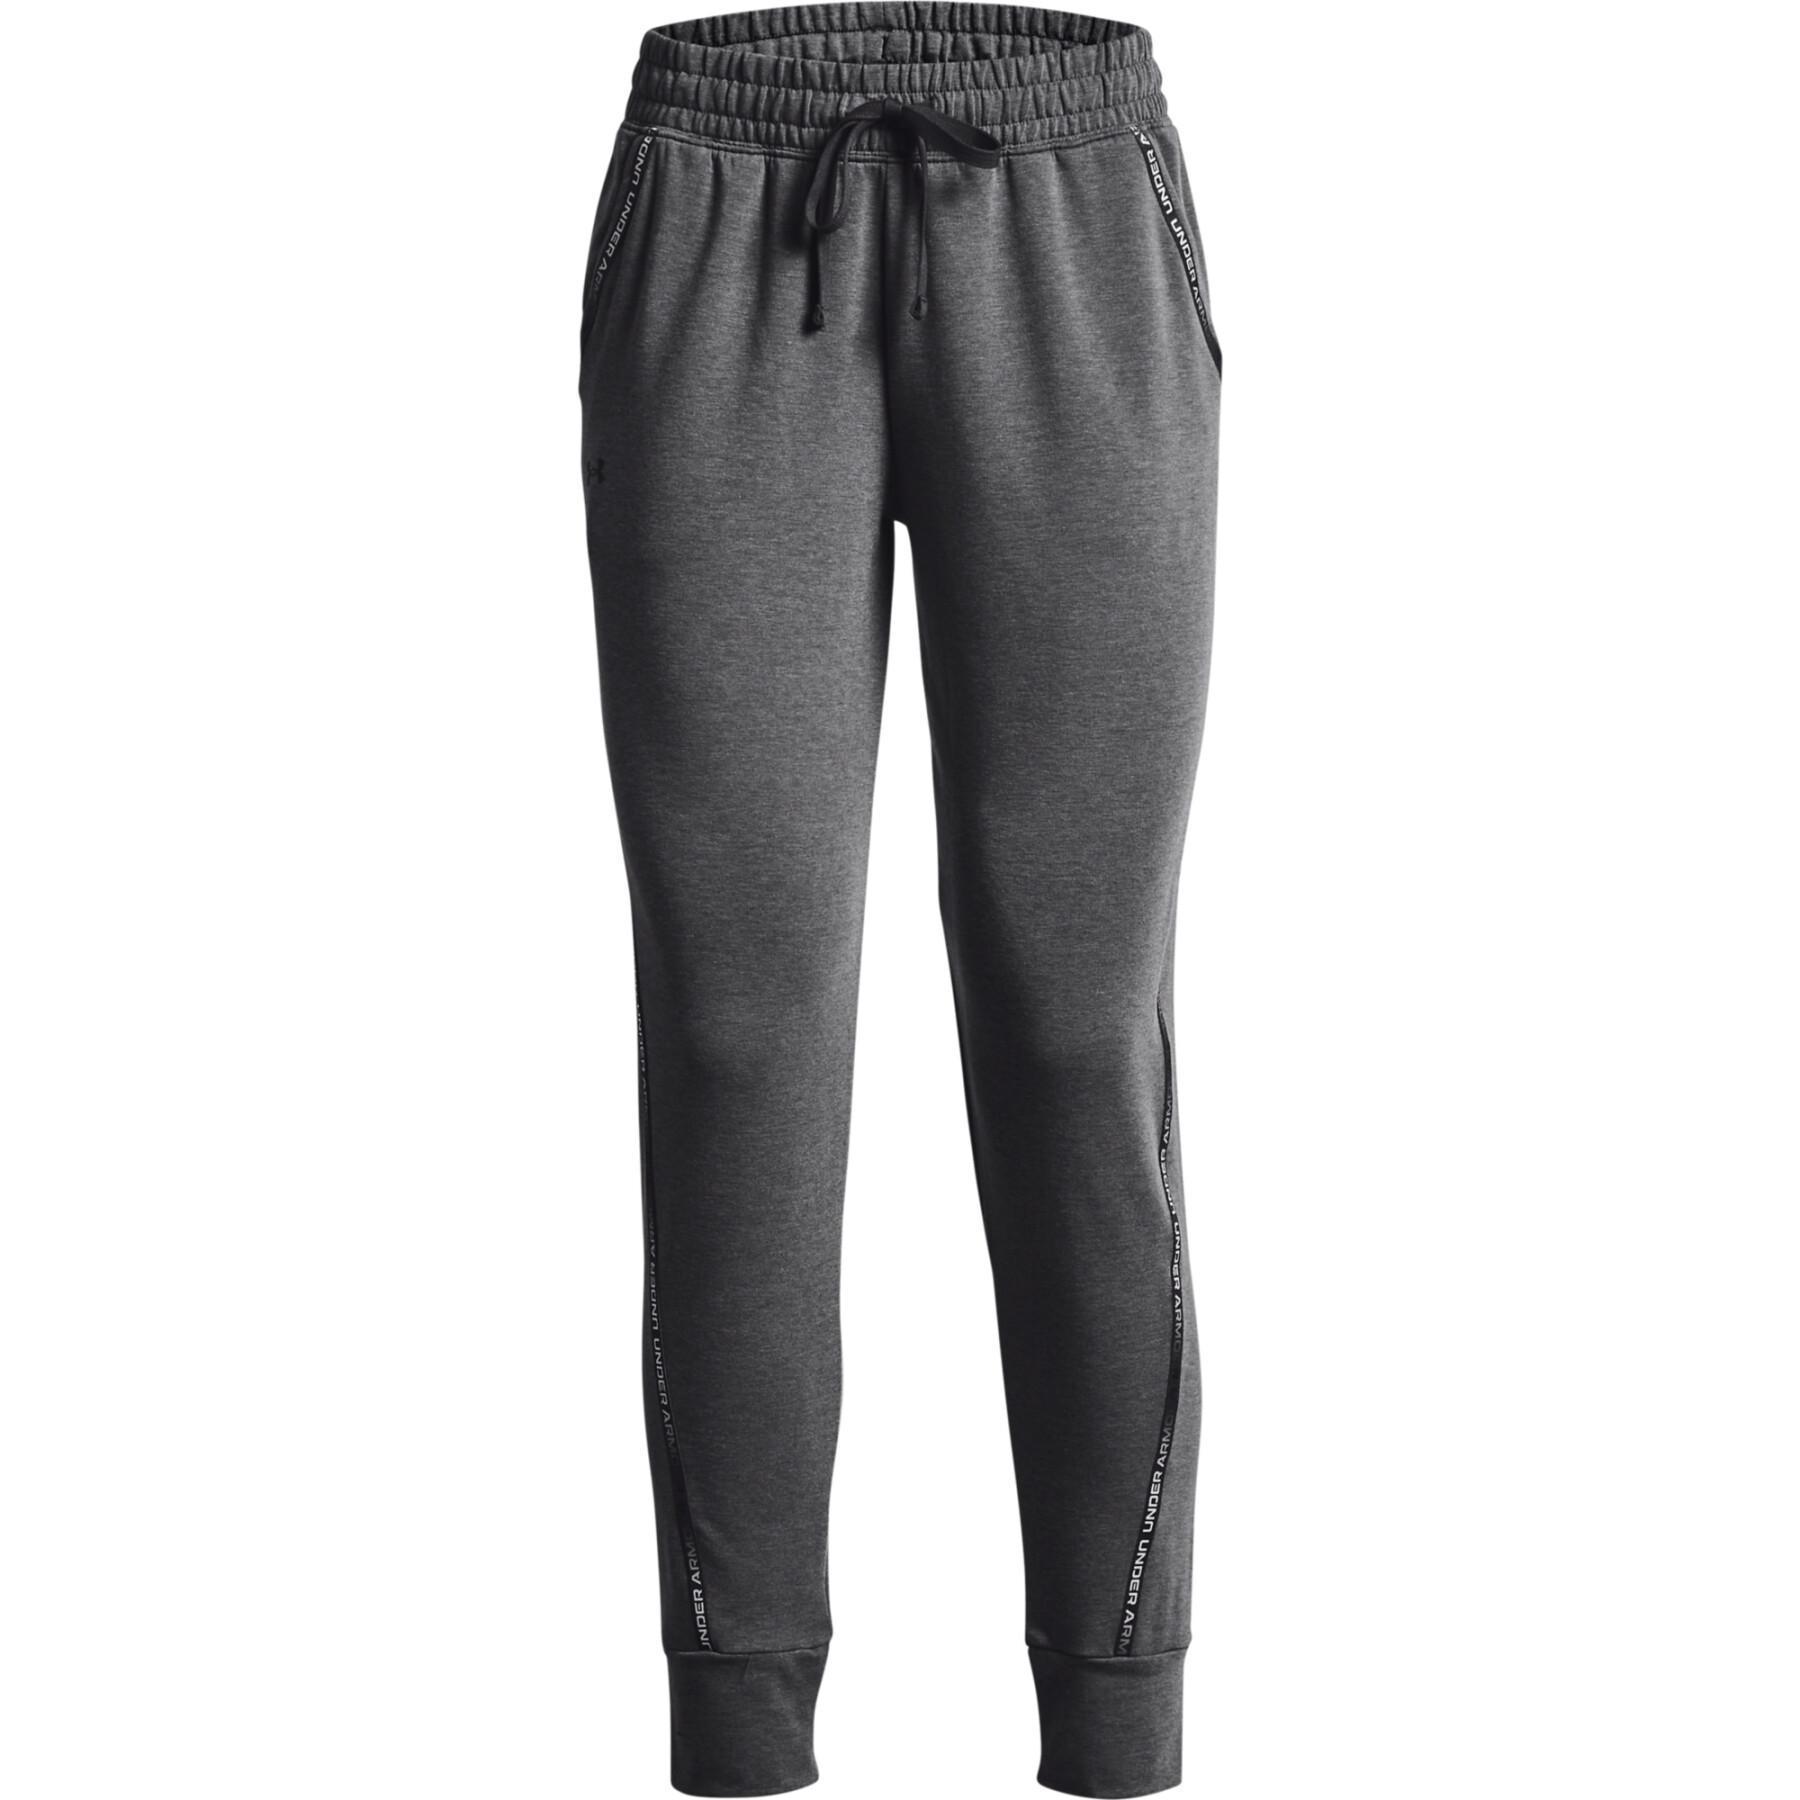 Pantalones de mujer Under Armour Rival Terry Taped